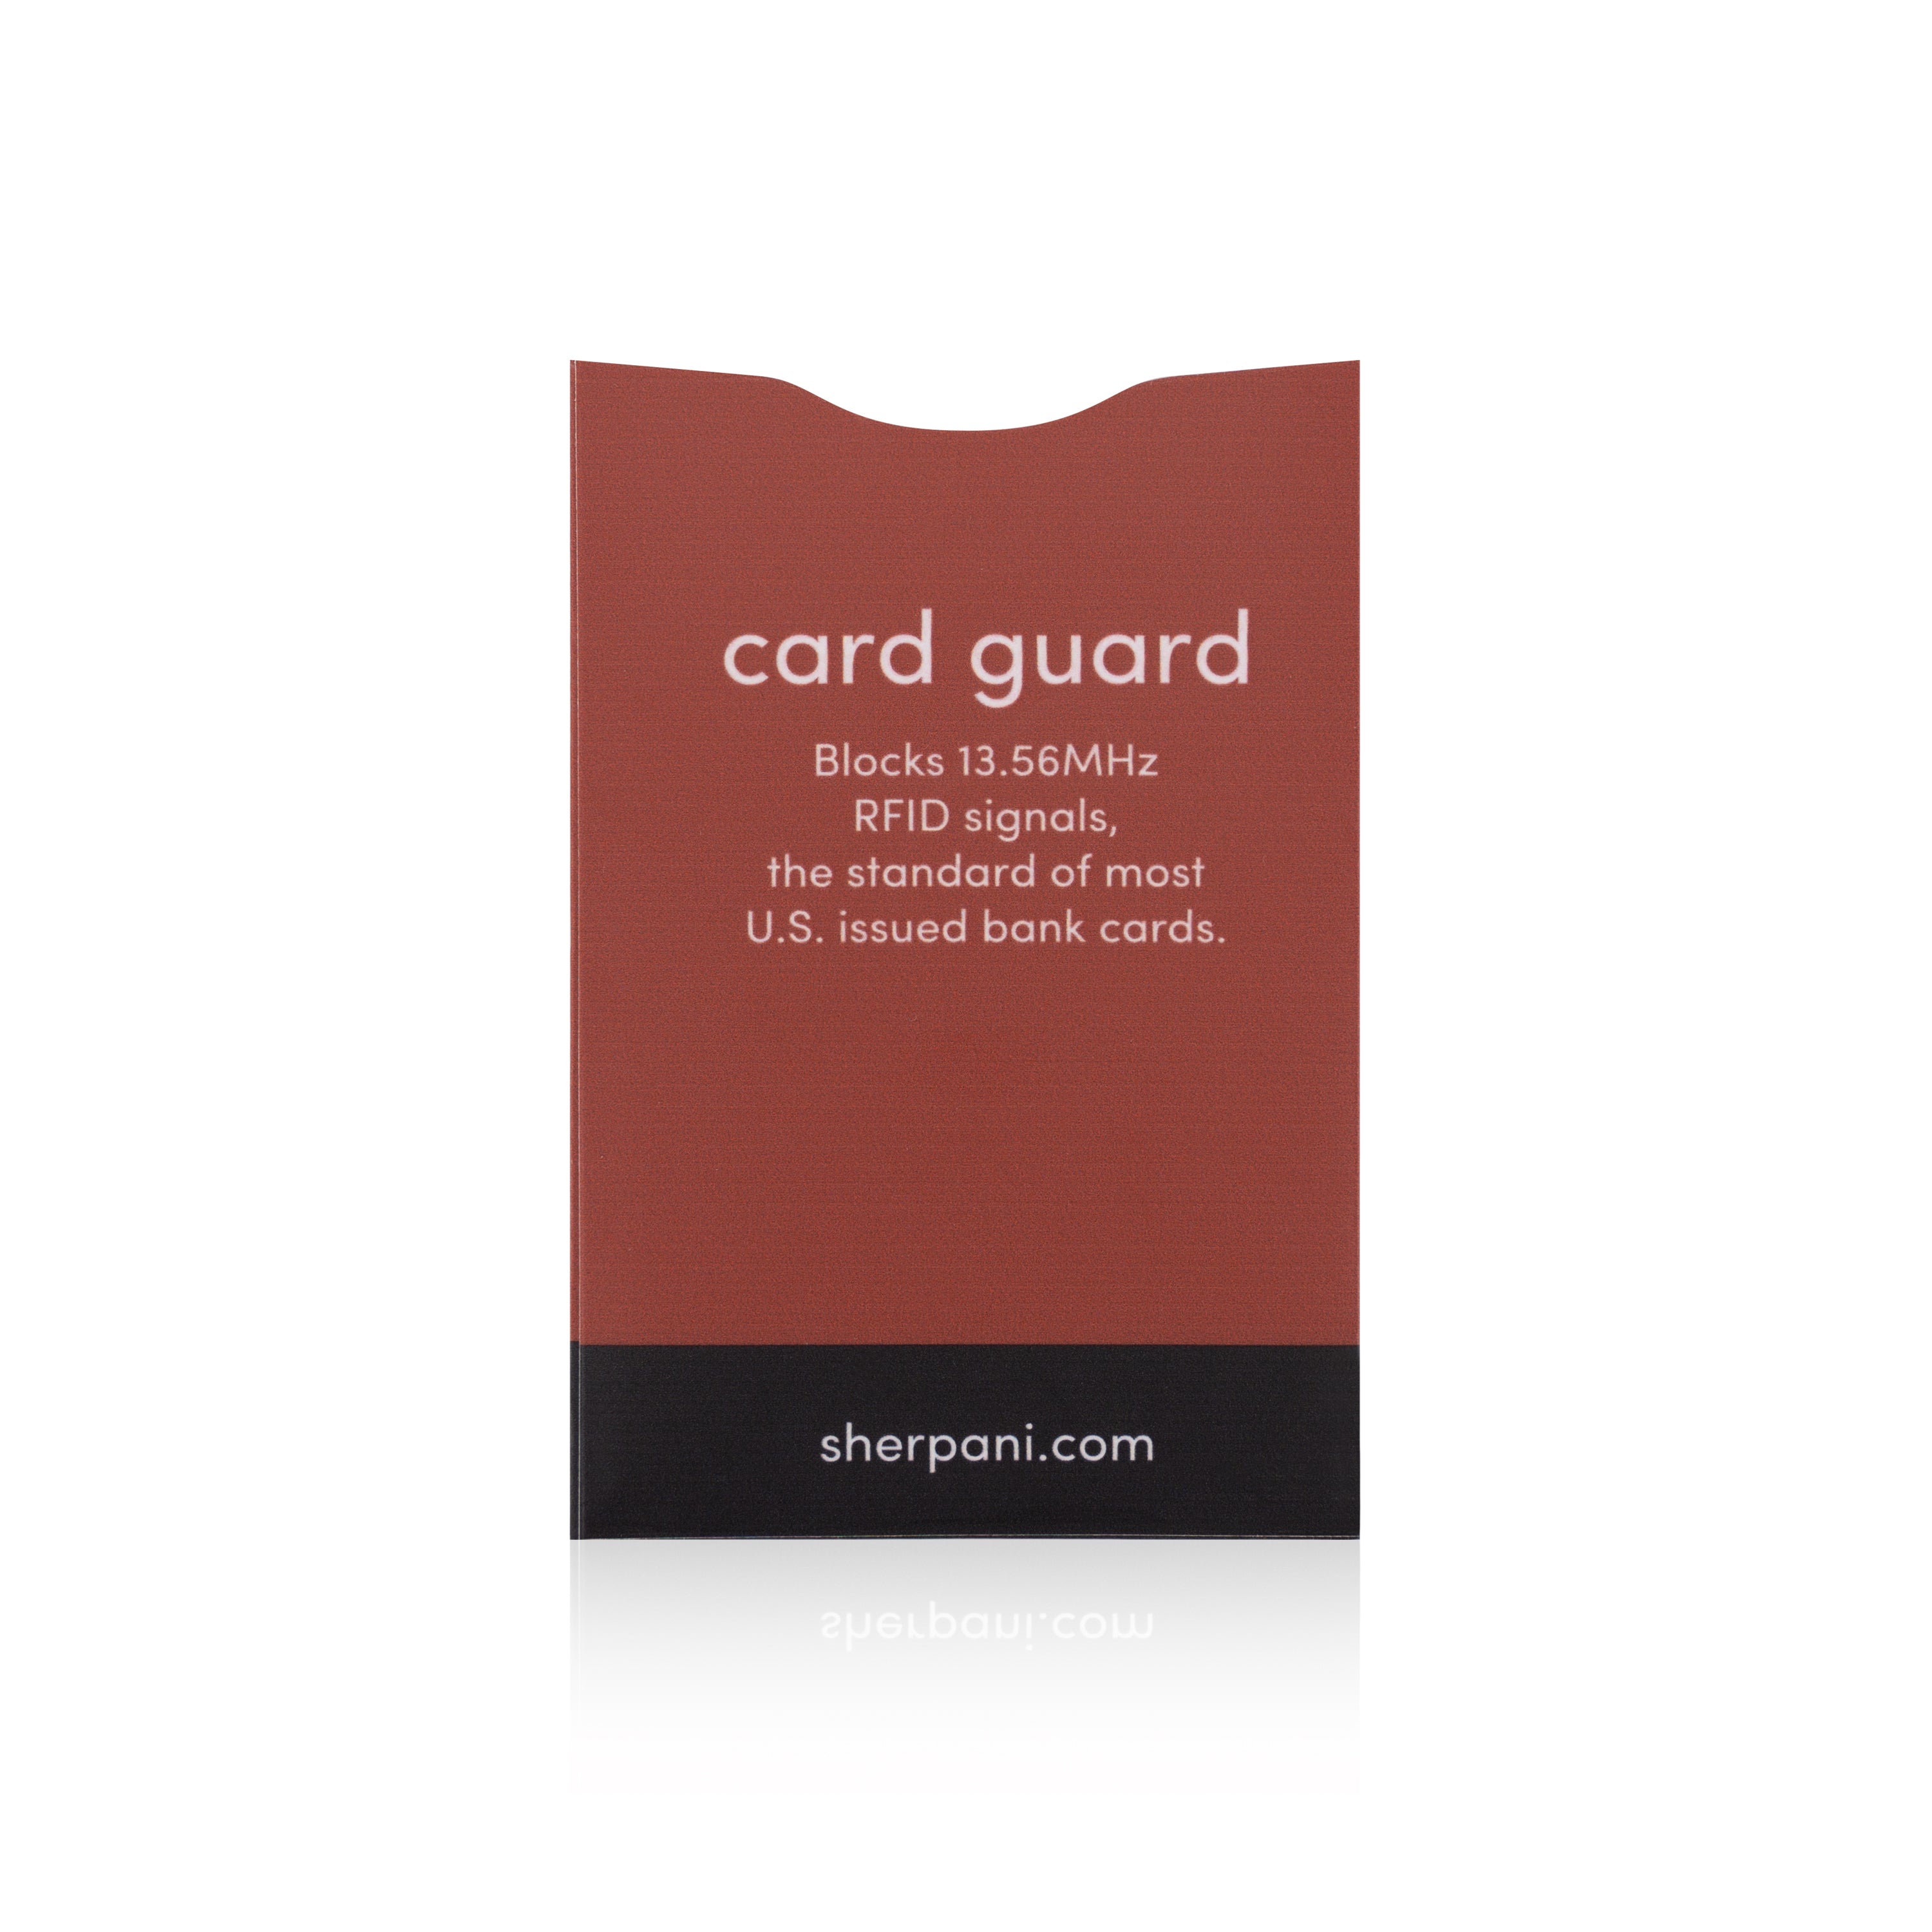 Back view of card guard in Cider. The back reads &quot;Blocks 13.56MHz RFID signals, the standard of most U.S. issued bank cards.&quot;